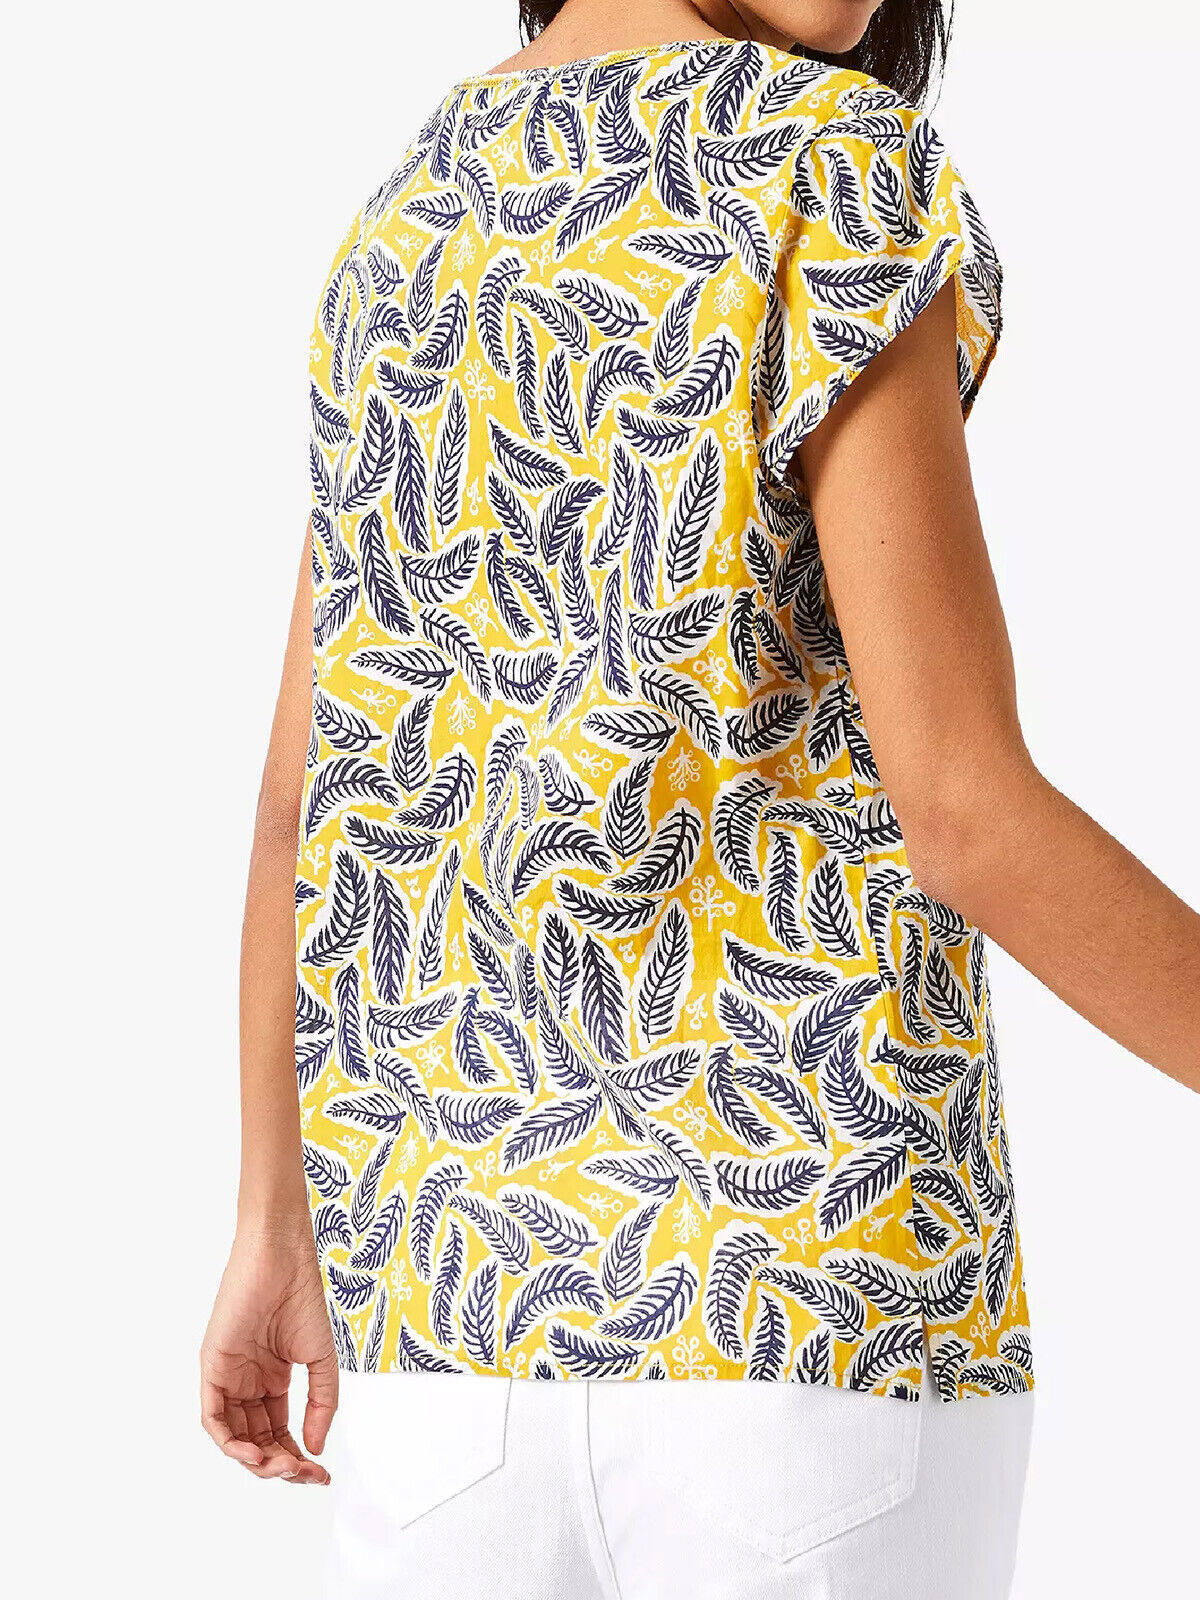 EX White Stuff Yellow Camelia Pure Cotton Printed Top in Size 10 RRP £32